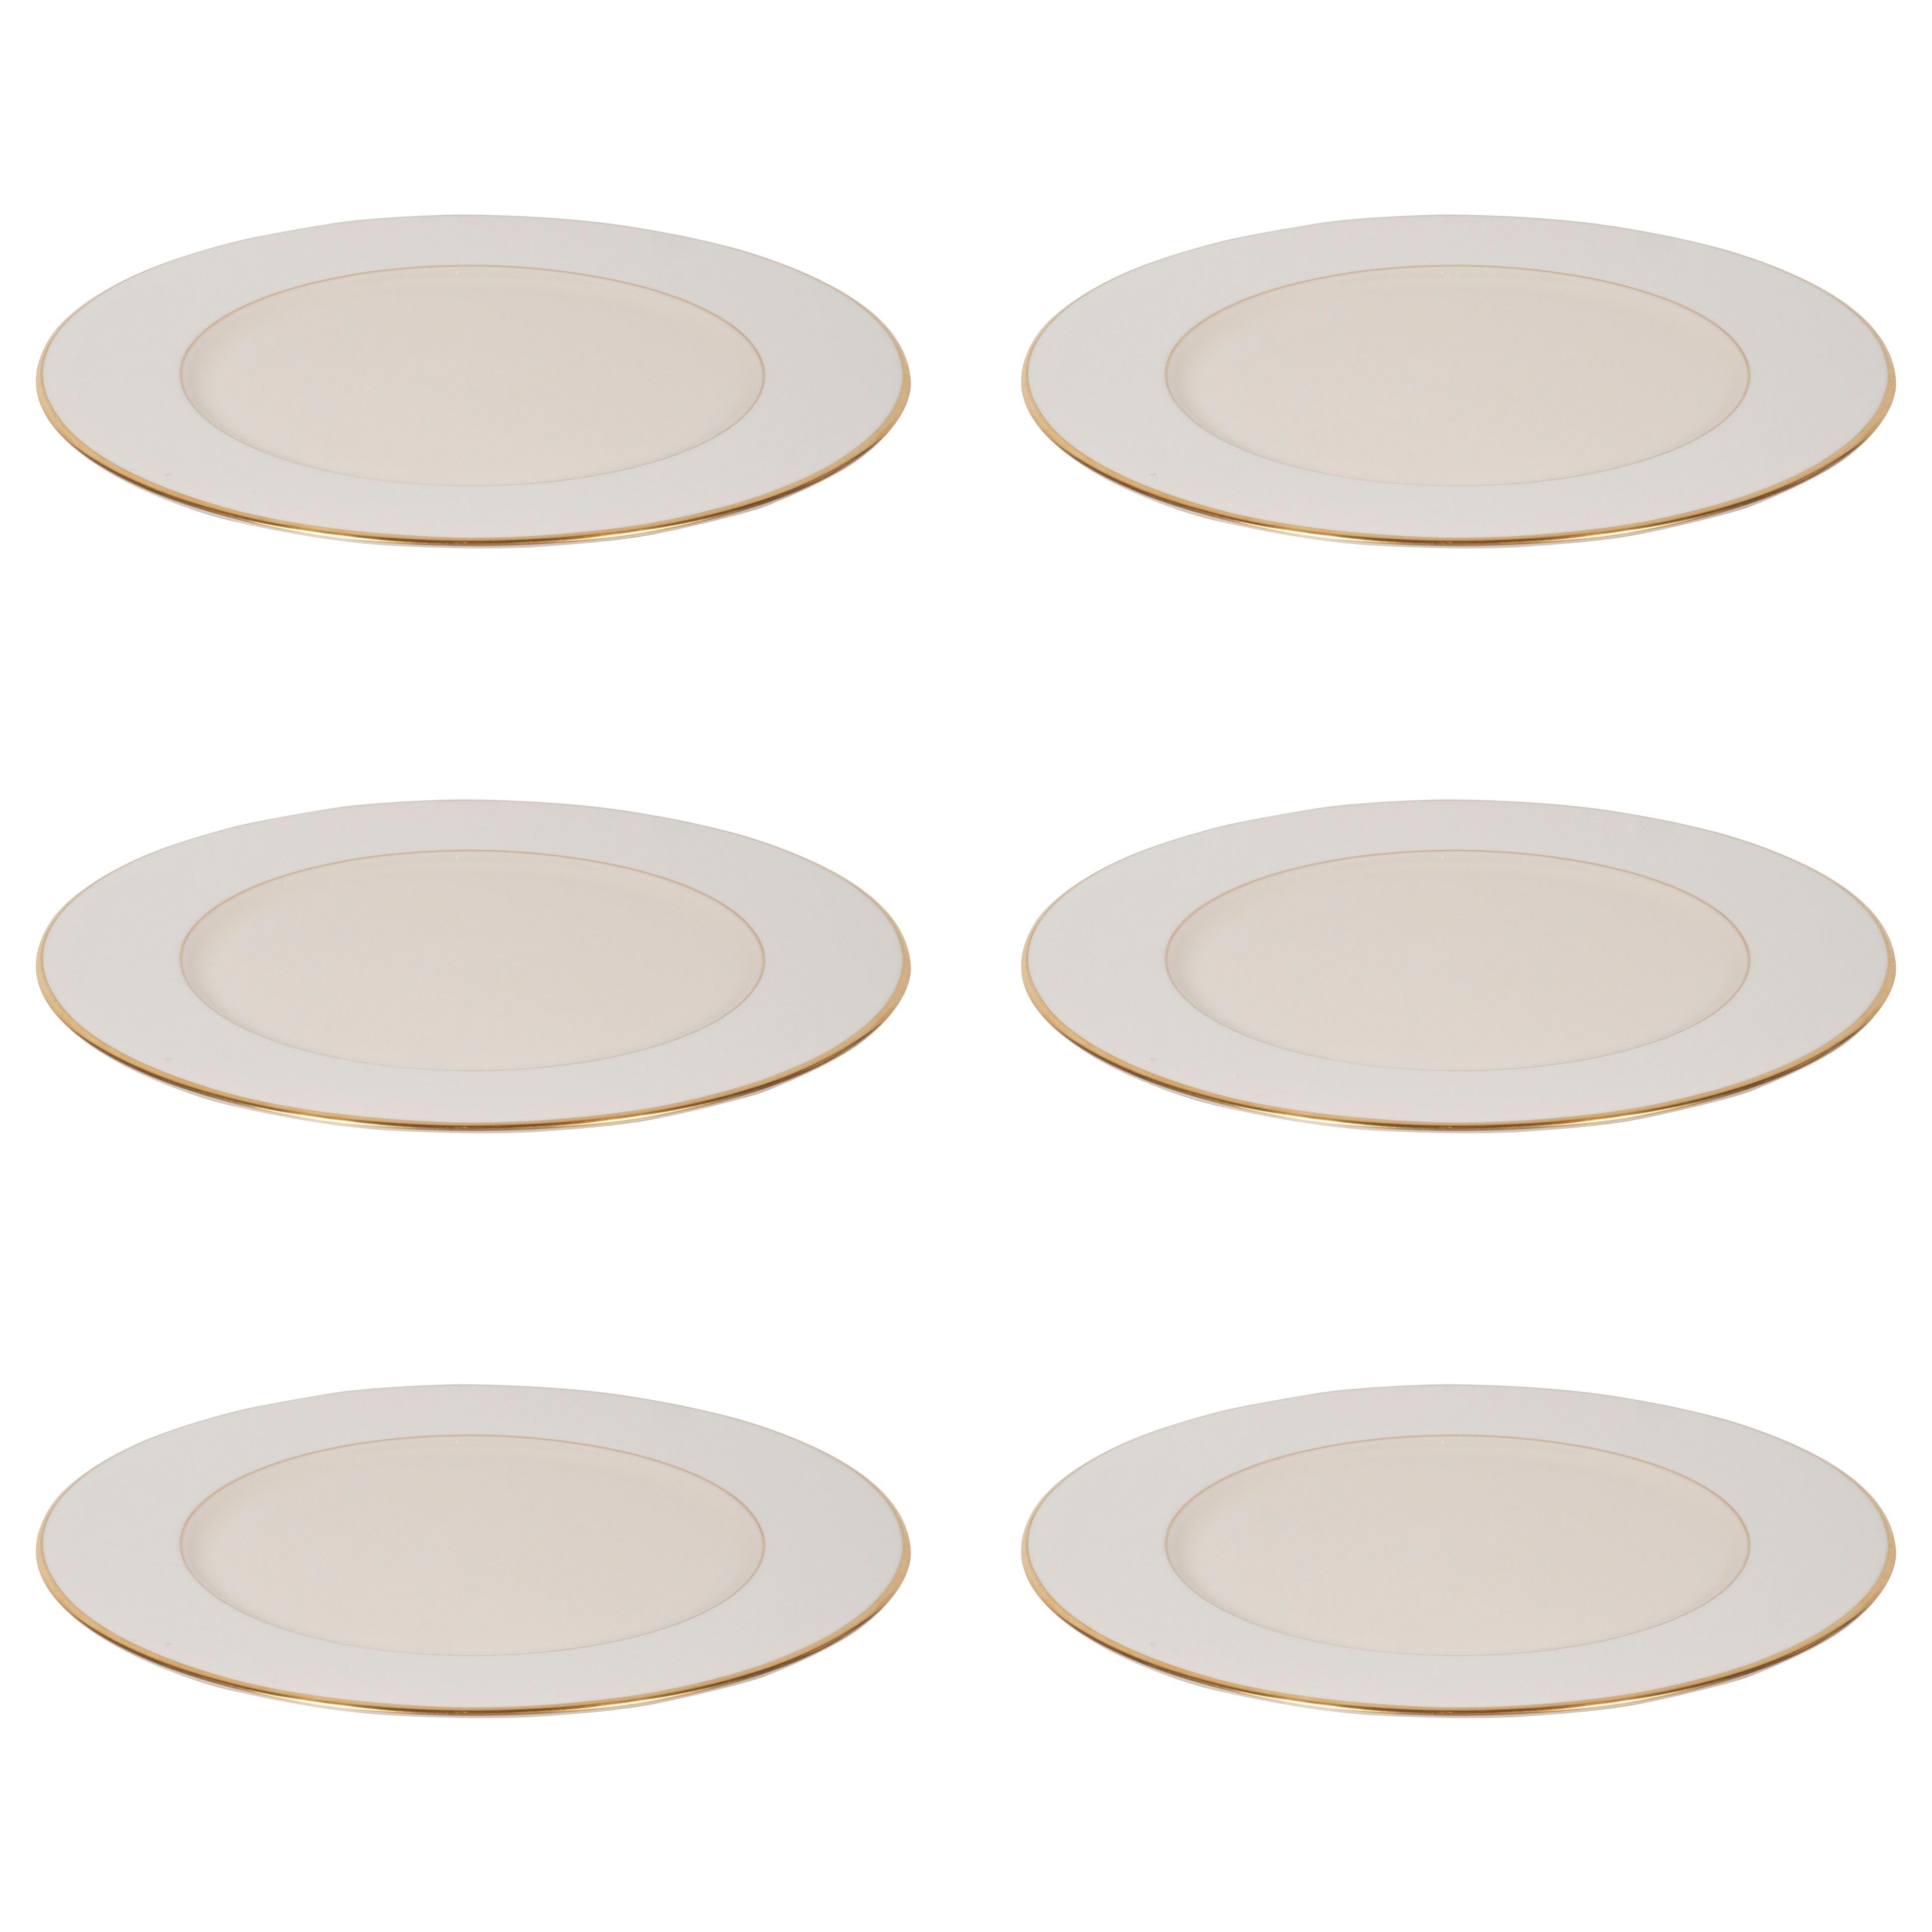 lenox charger plates